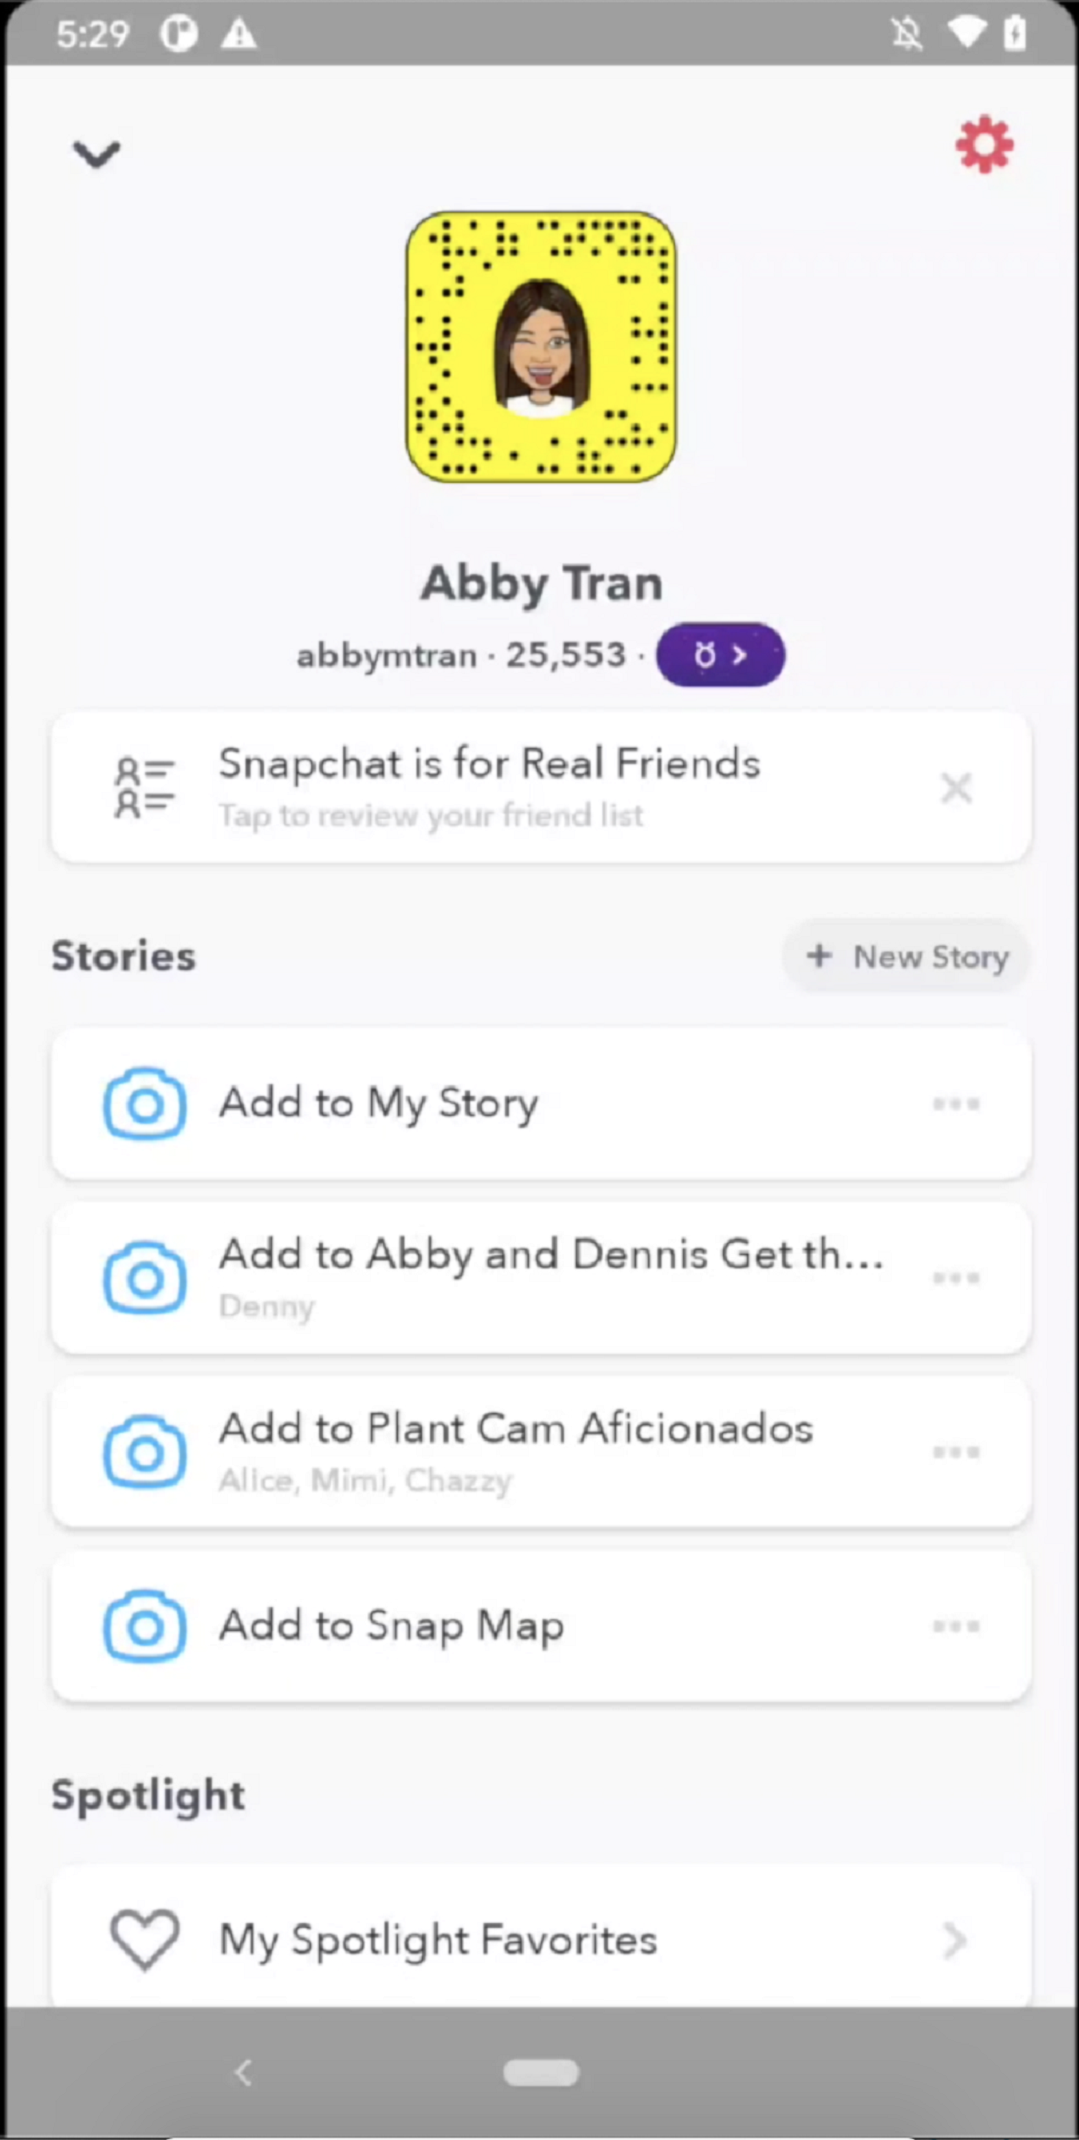 Snapchat's Friend Check Up tool